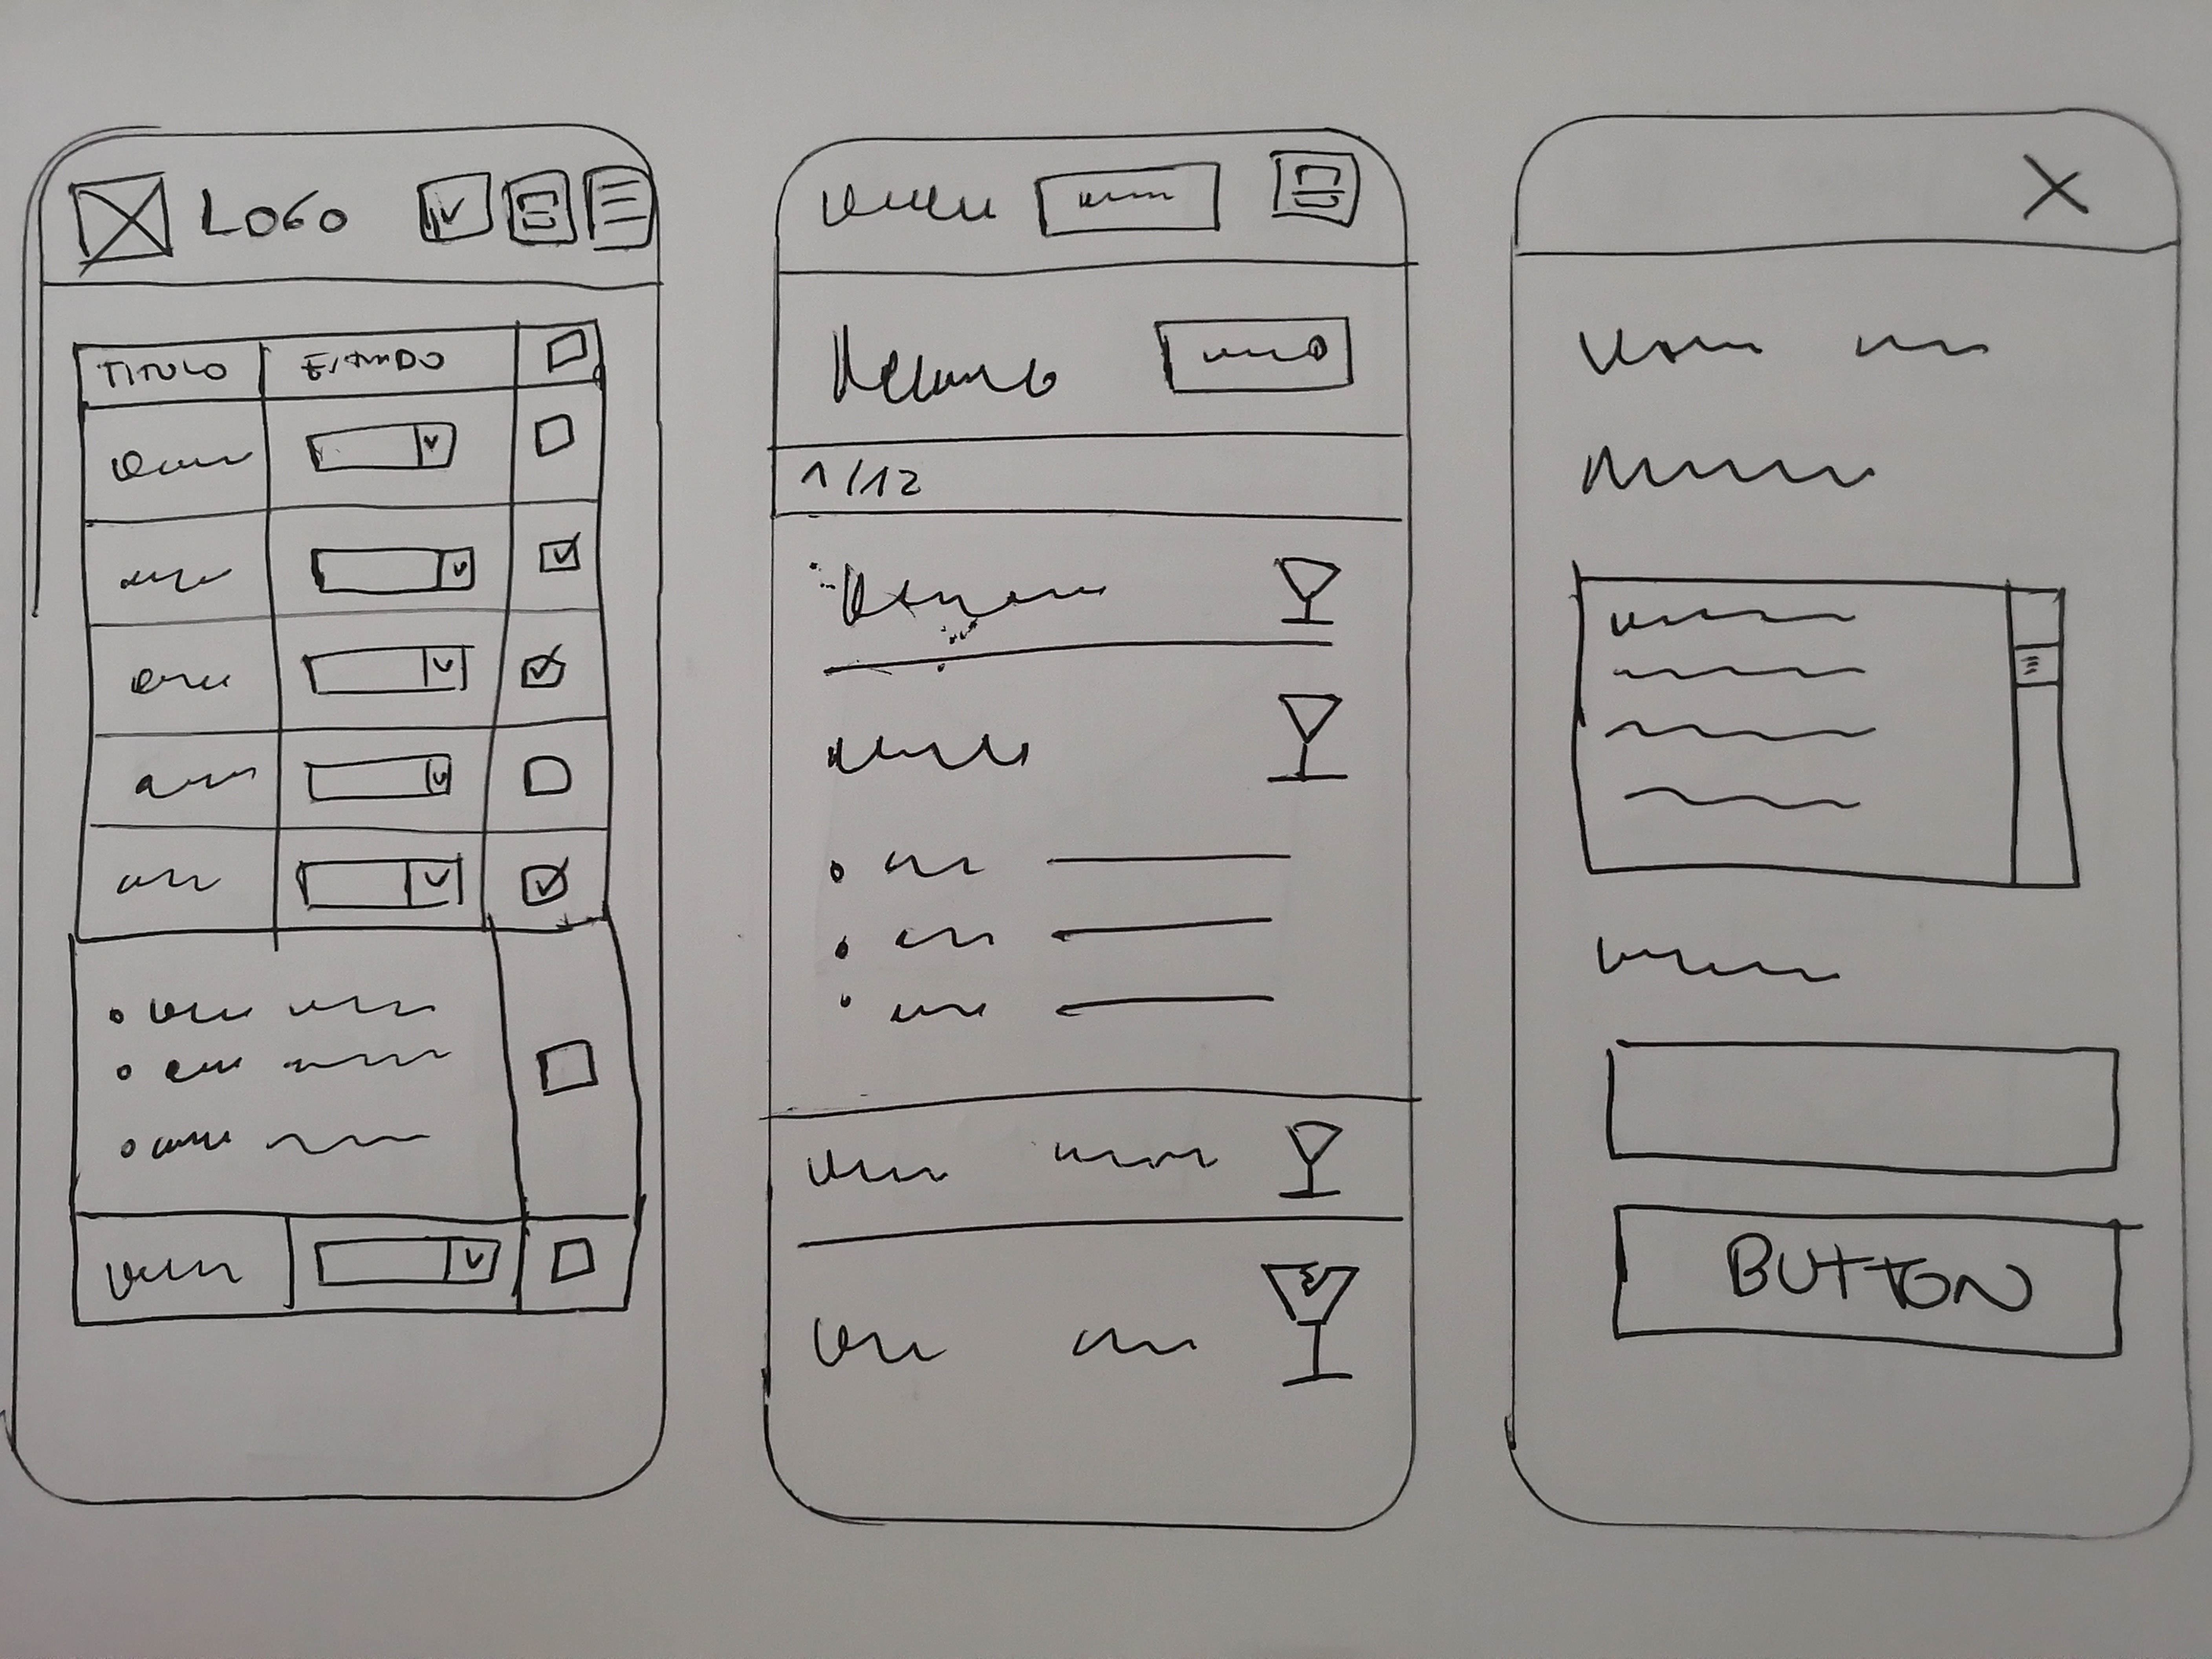 Design of paper prototypes to validate the user experience.